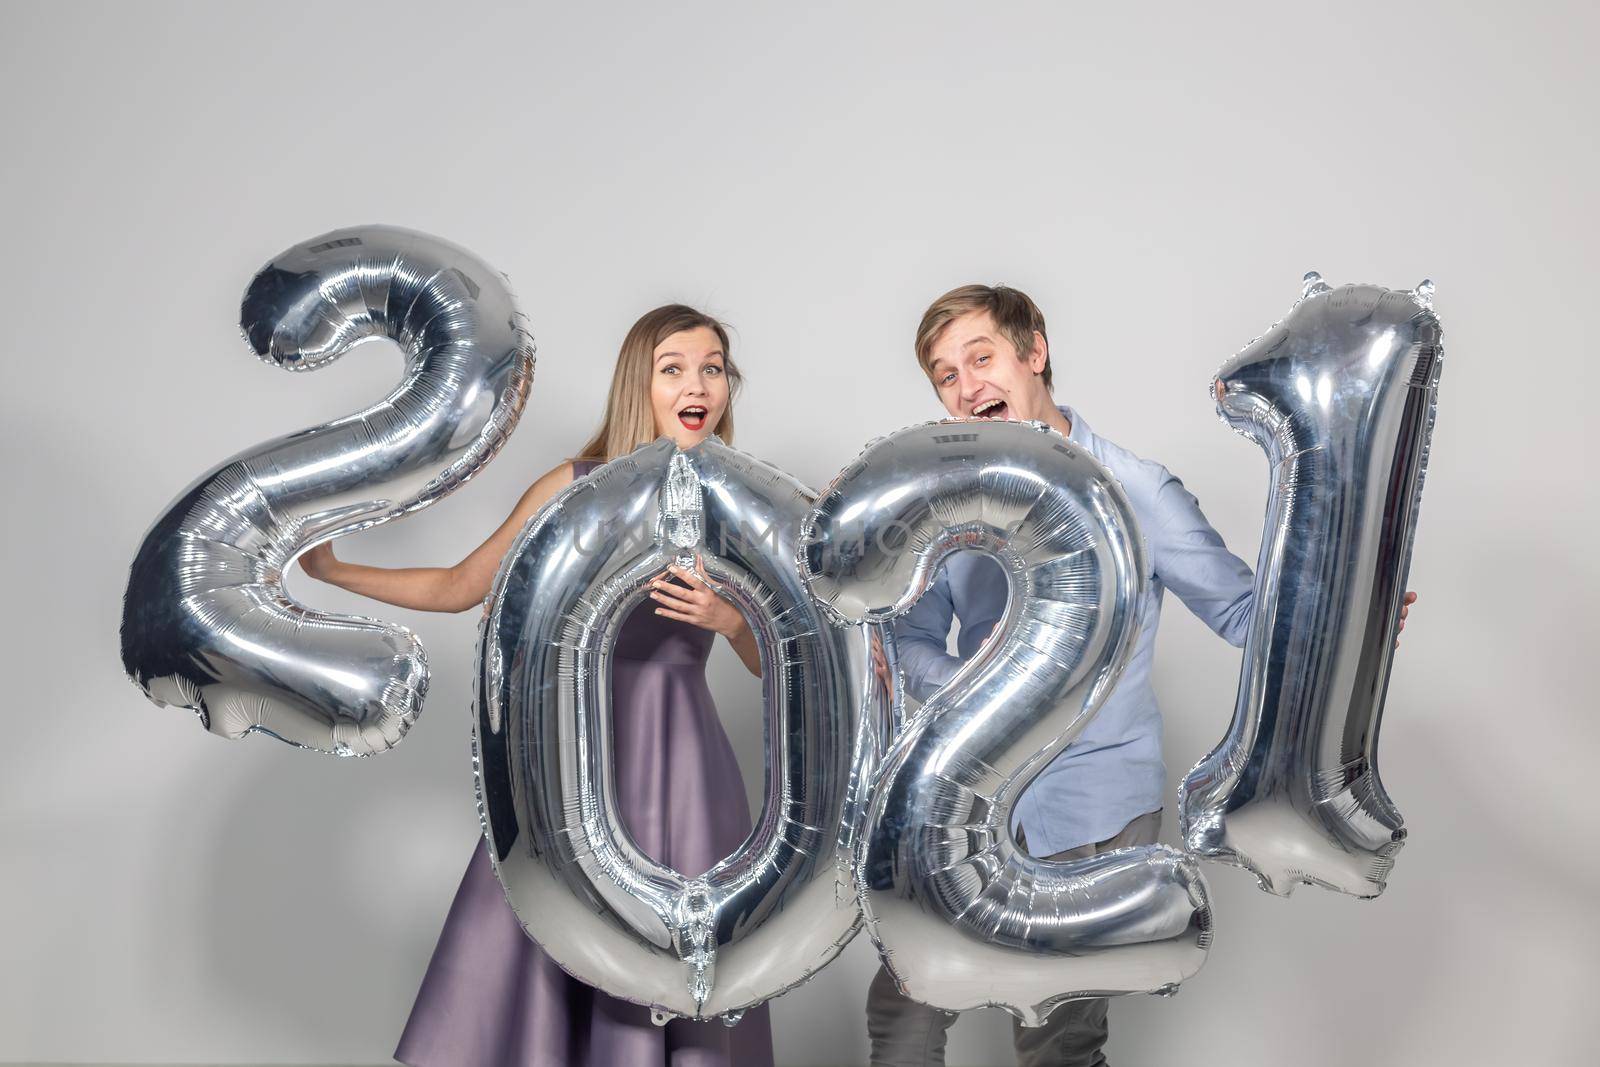 Party, people and new year holidays concept - woman and man celebrating new years eve 2021.